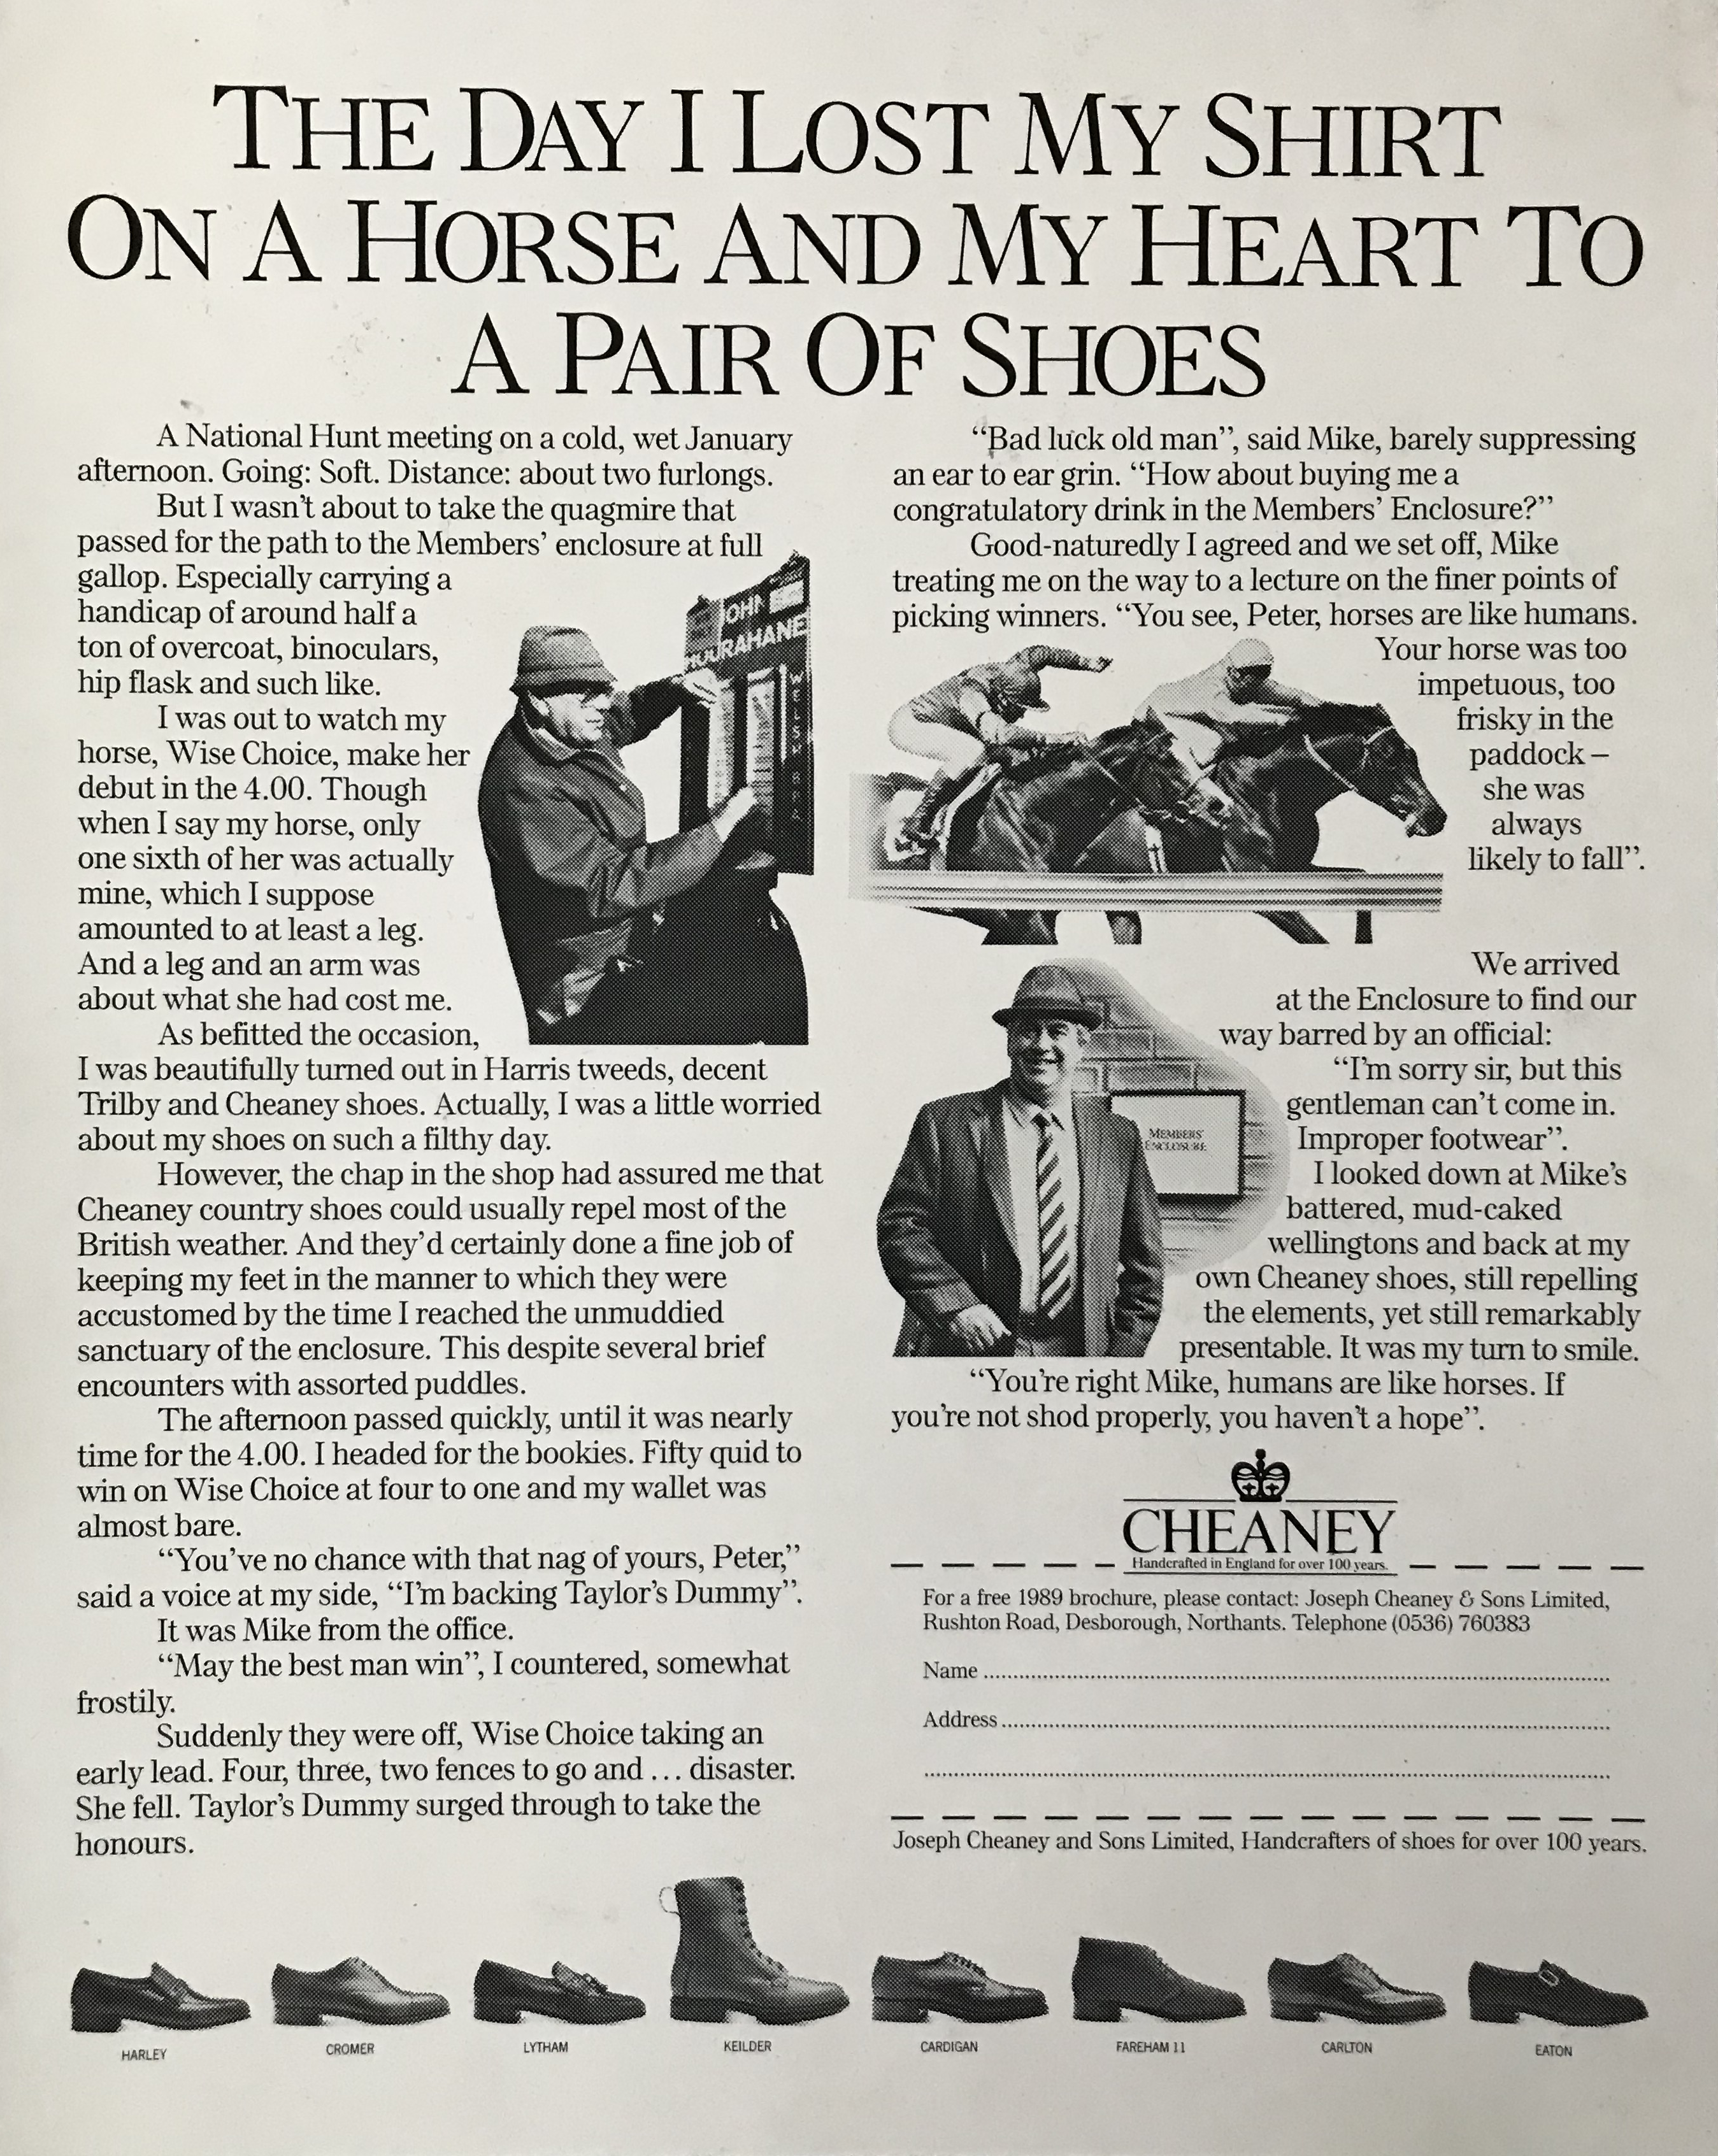 Cheaney shoes press ad